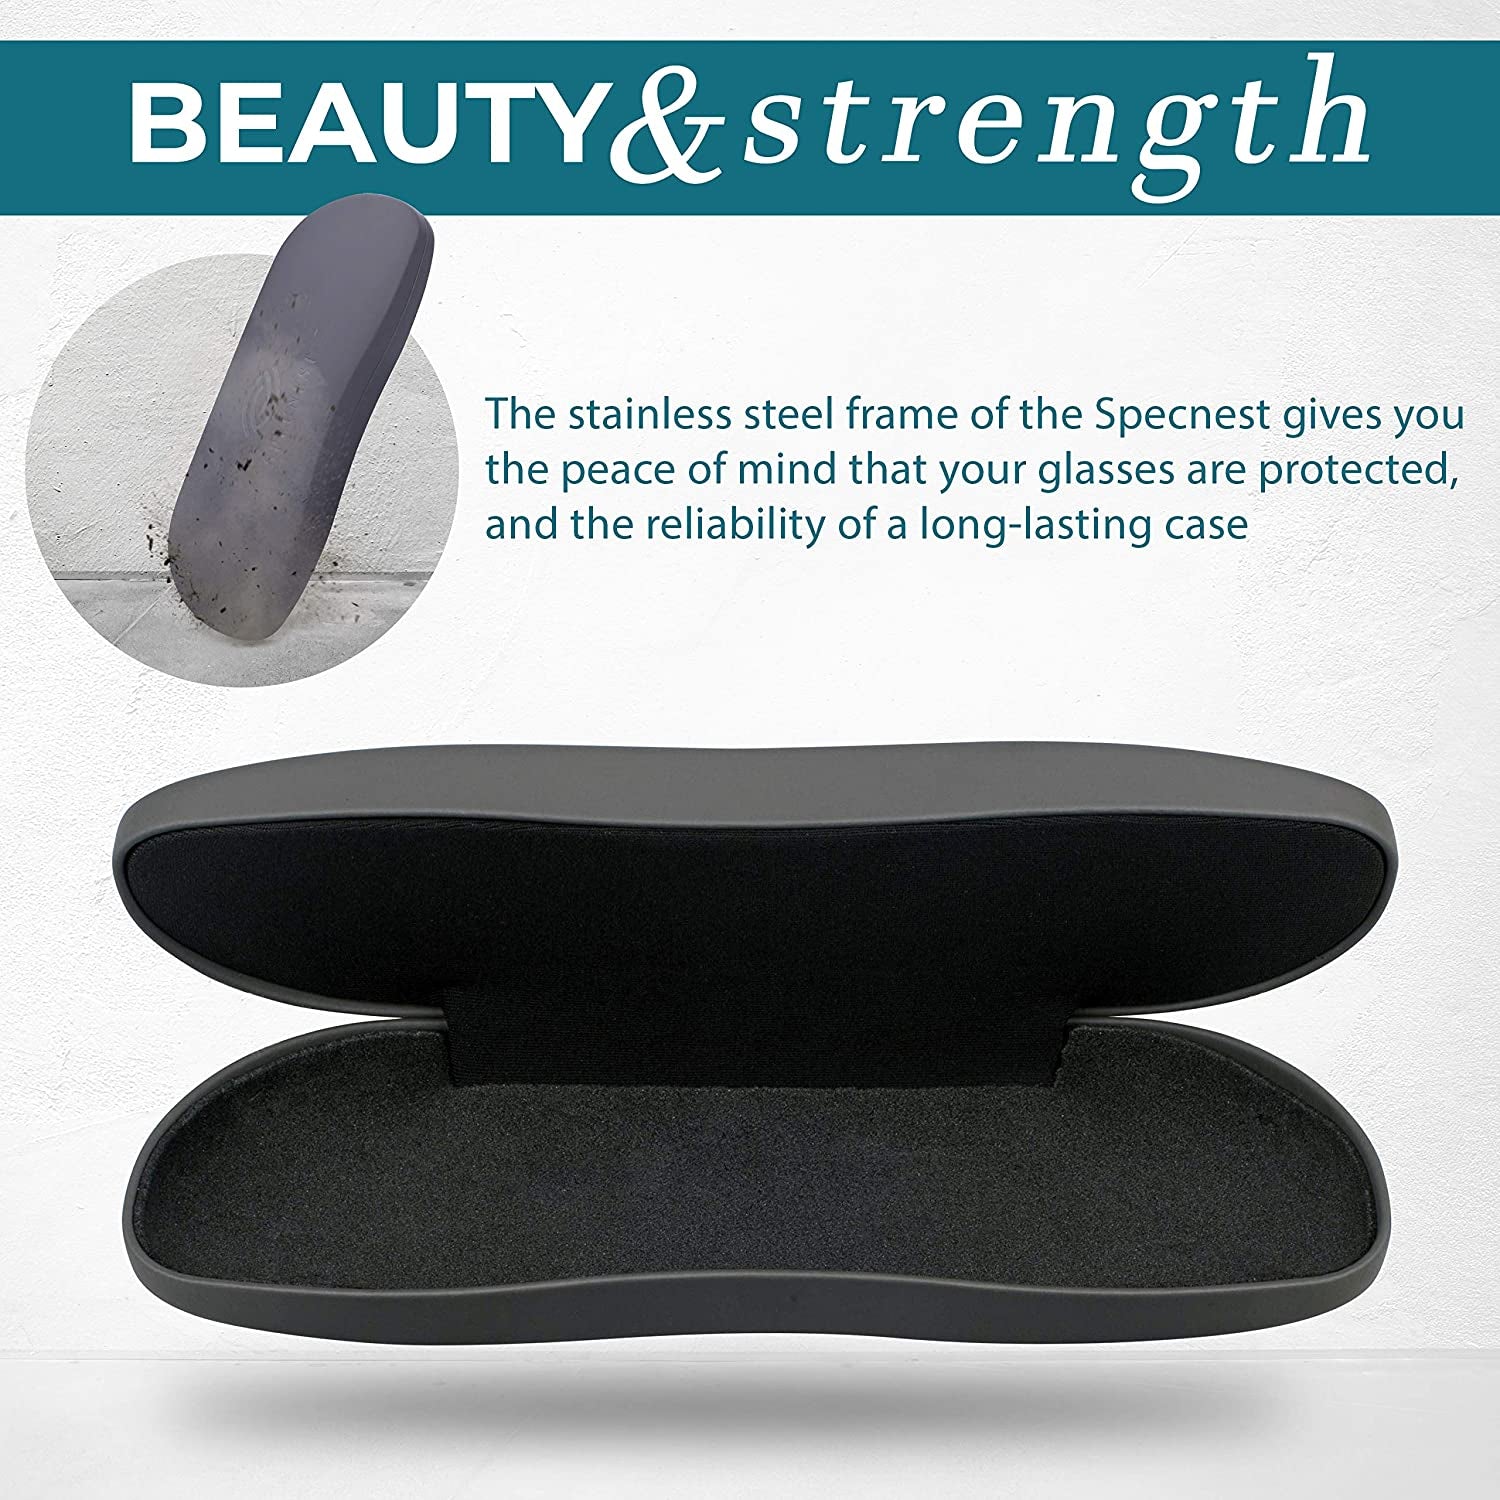 Specnest Eye Glass Case - Thin and Slim Hard Shell Glasses Case for Eyeglasses - Stainless Steel Shell with Vegan Leather for a Modern Professional Look - Hard Glasses Case